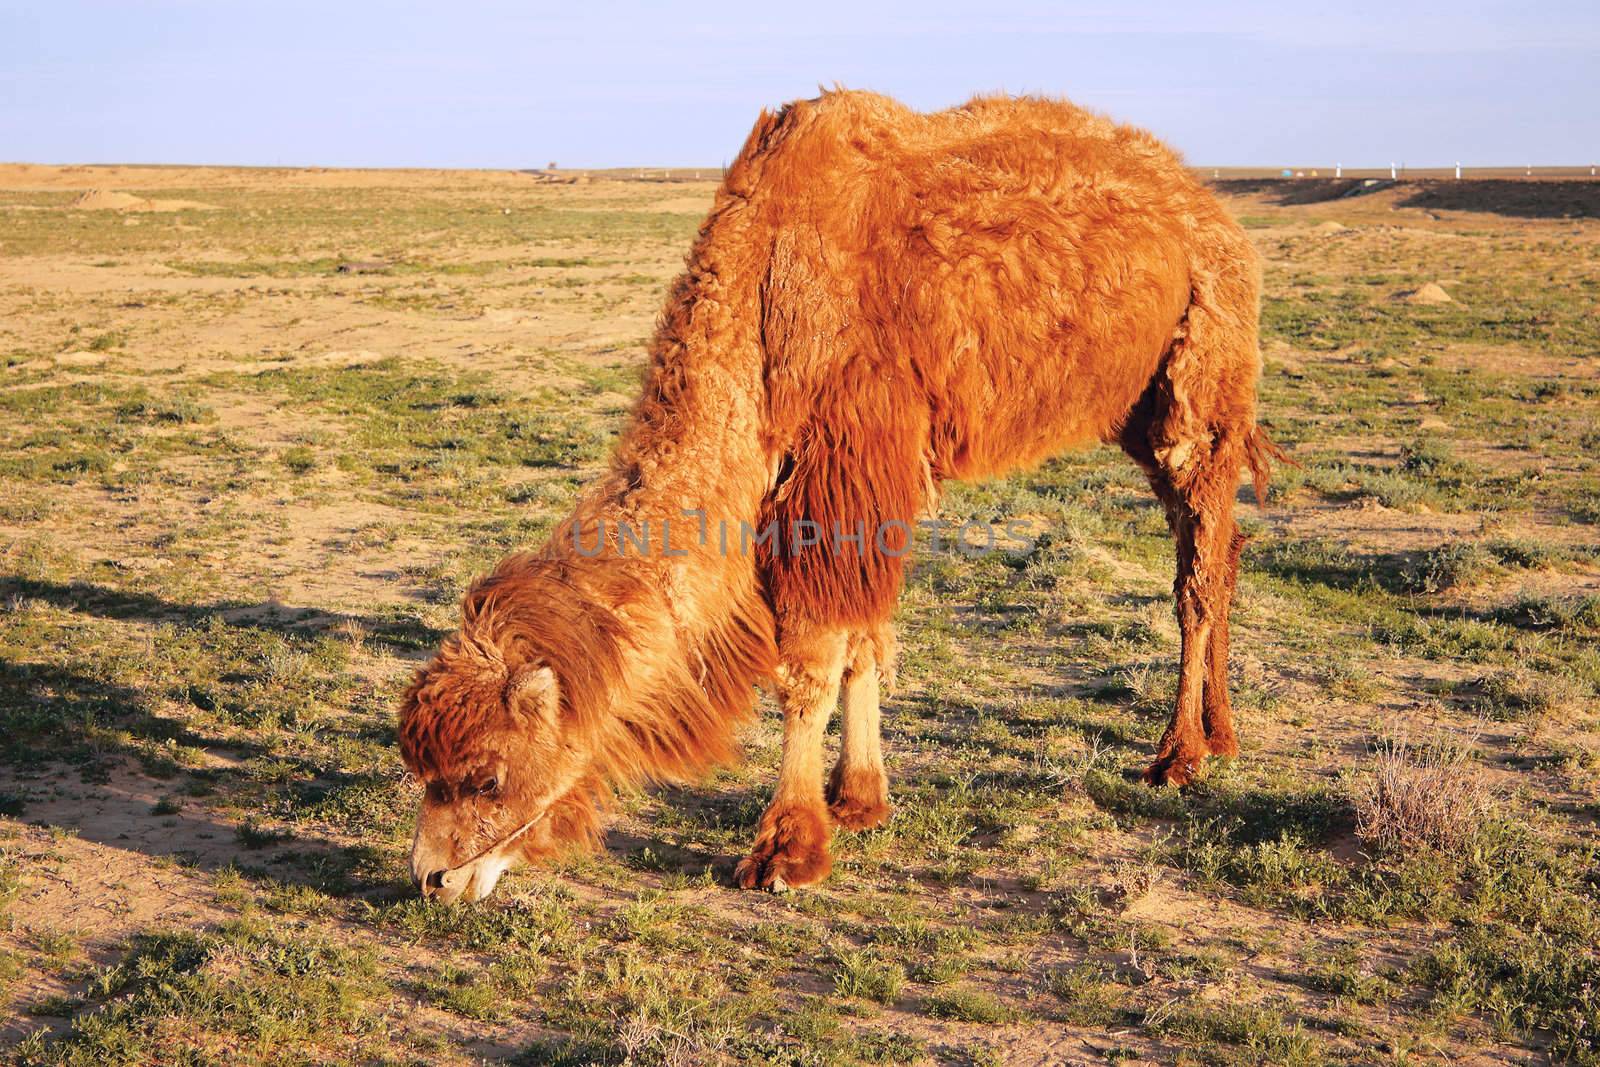 The camel eats grass steppe. Month end of April, evening.